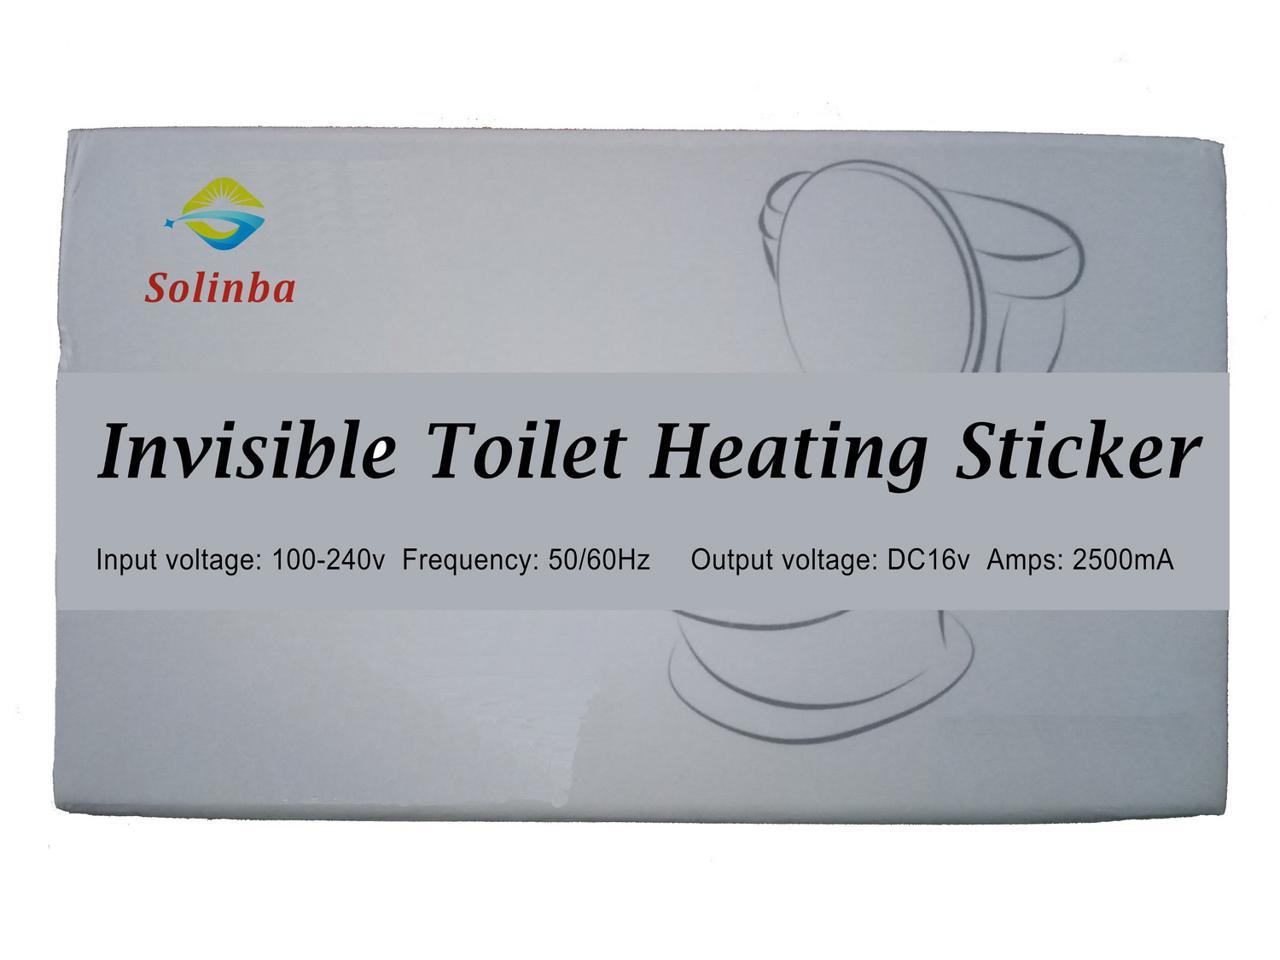 Solinba Invisible Electric Toilet Heating Sticker waterproof stable easy install 